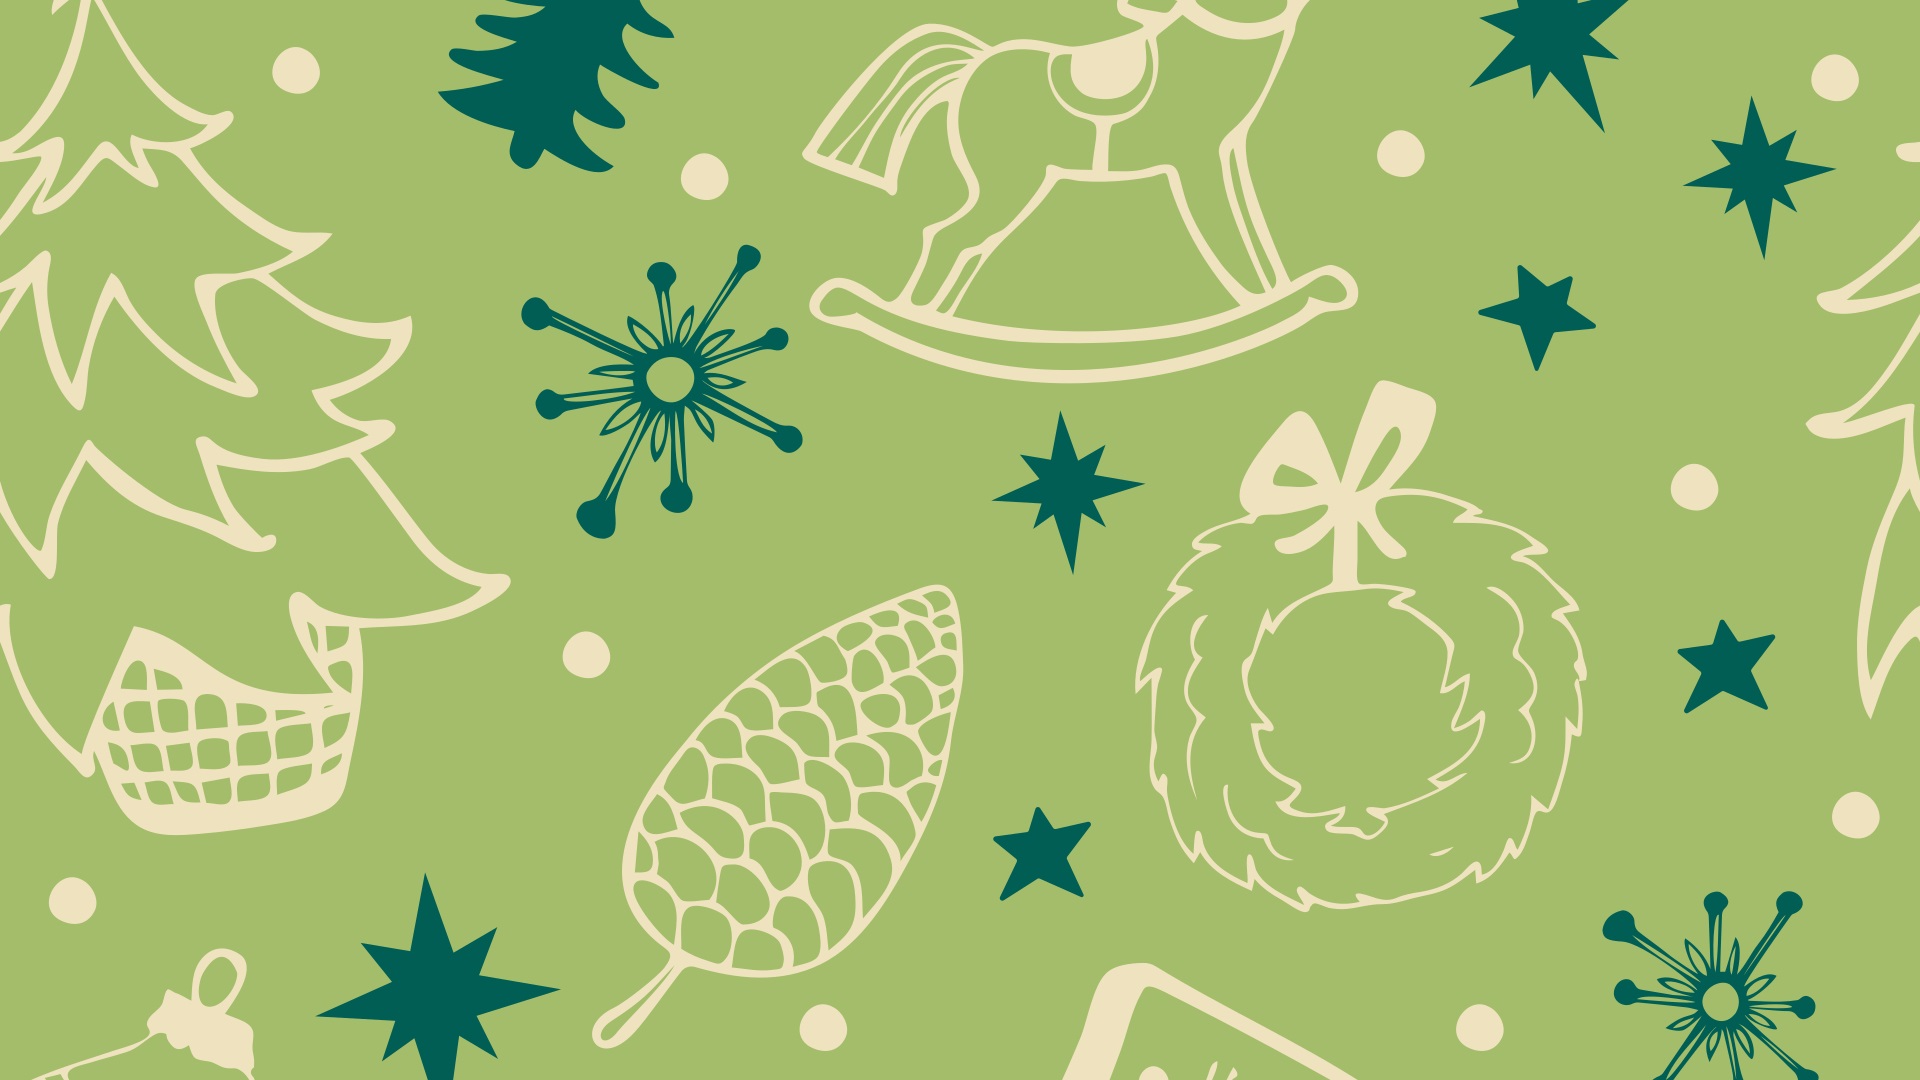 20 Free Christmas Backgrounds To Use On Zoom 7